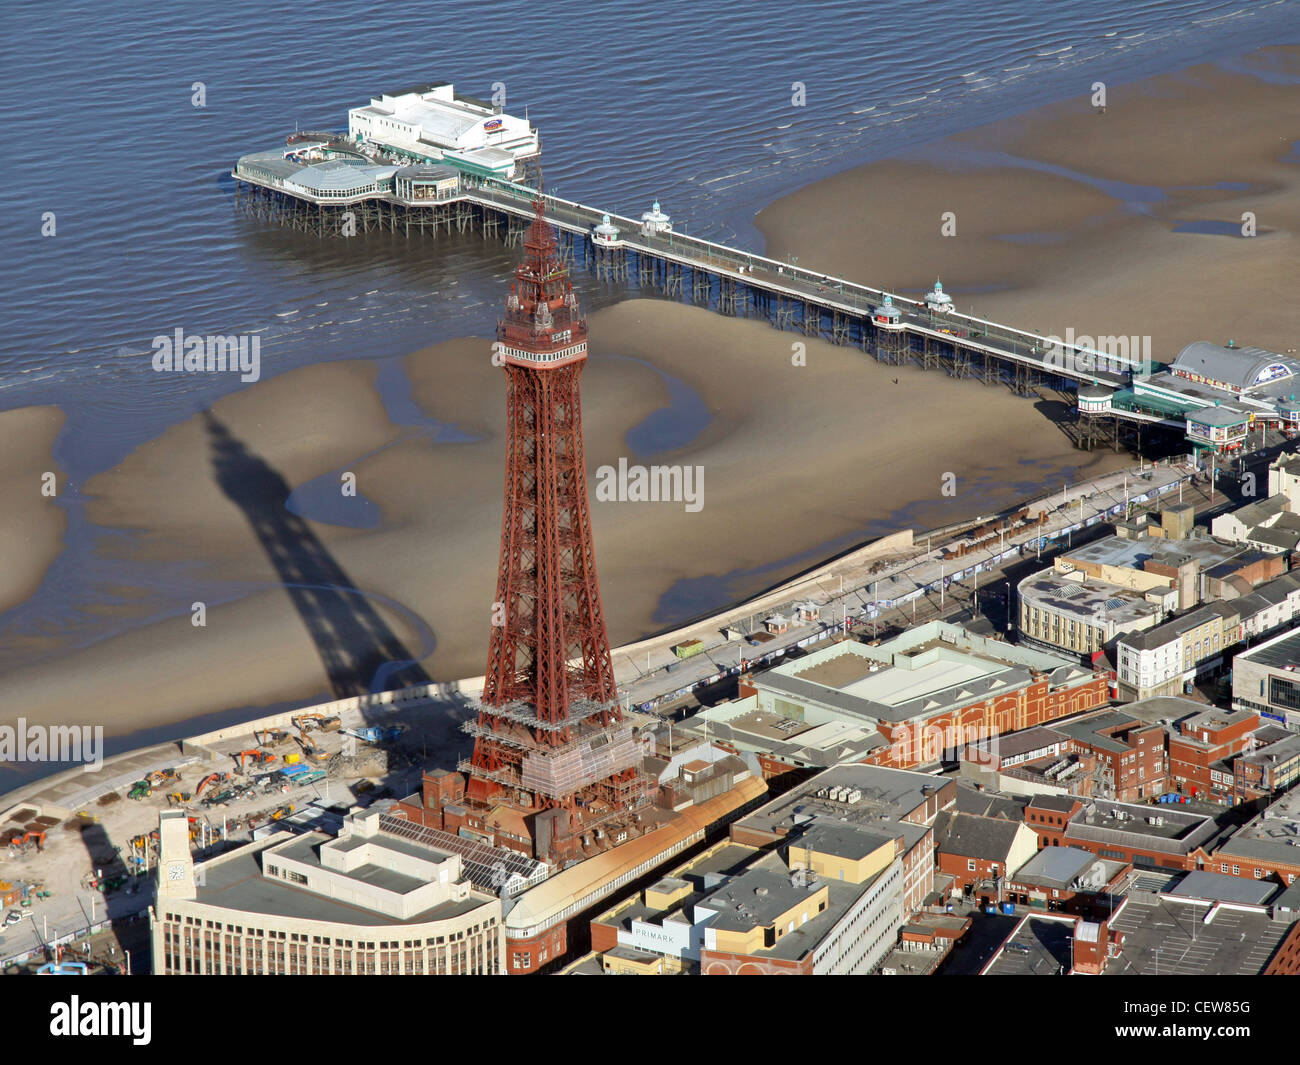 Aerial image of Blackpool Tower &The Central Pier with seafront Stock Photo